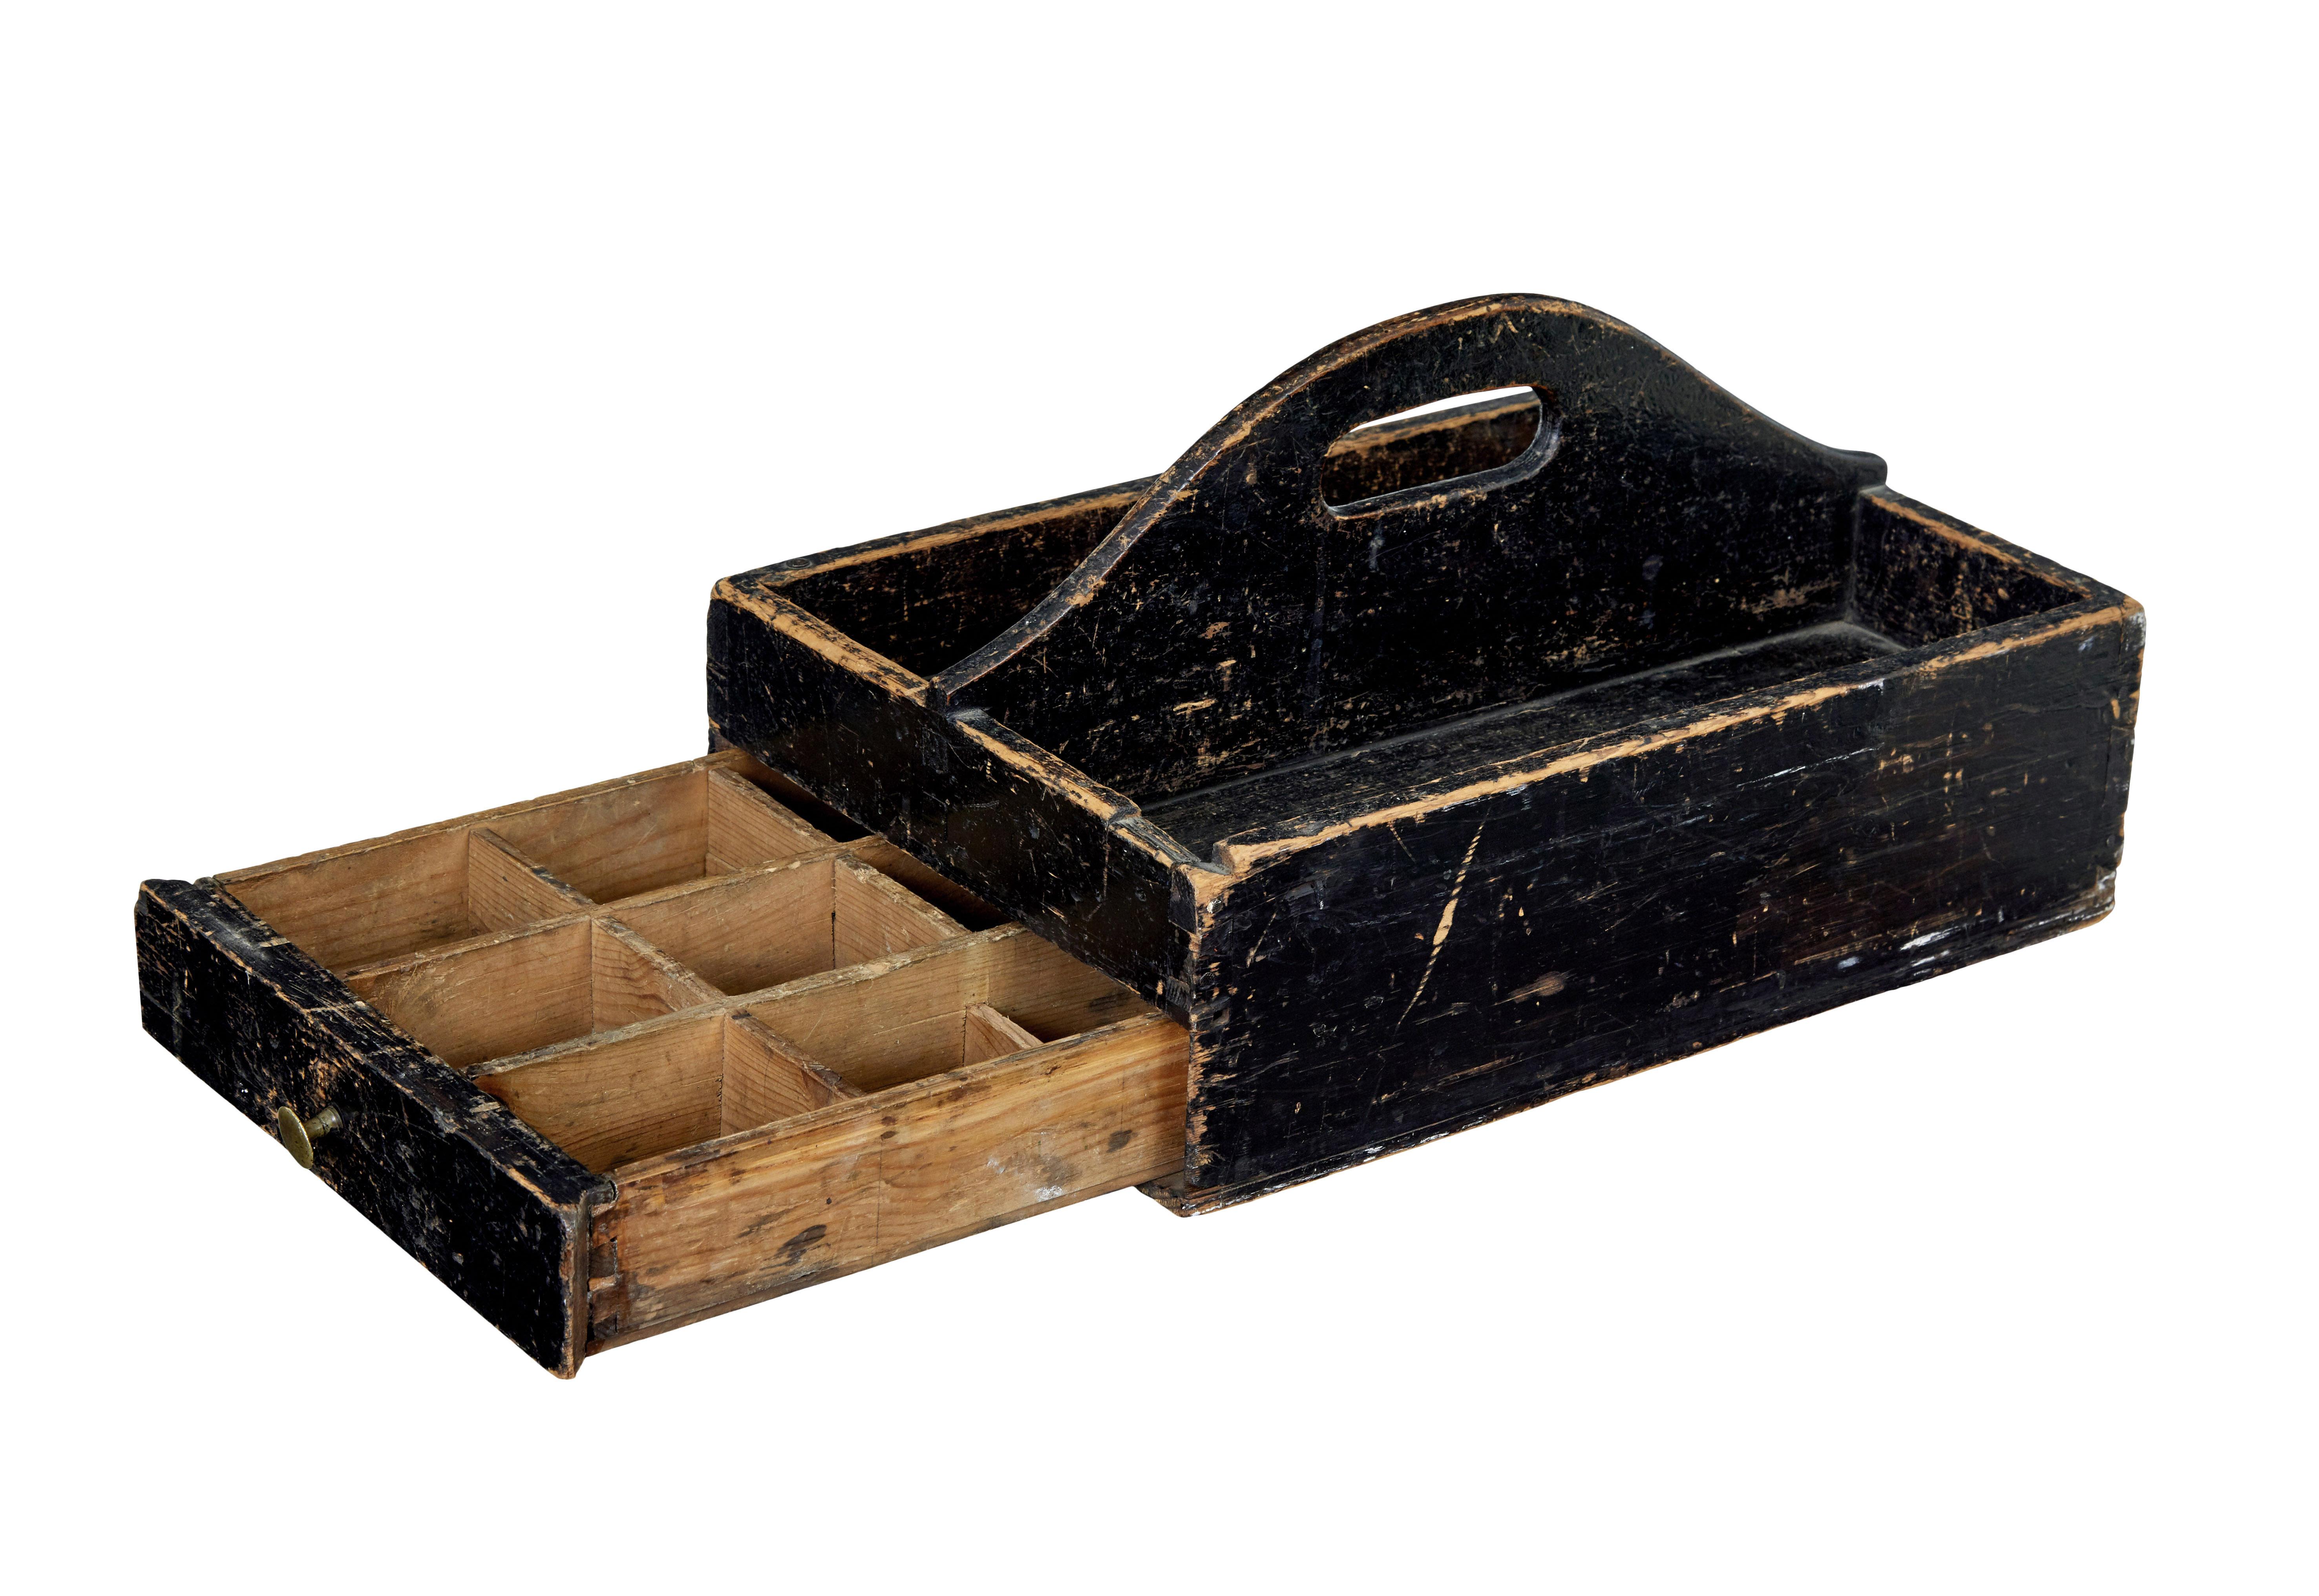 19th century Scandinavian rustic pine cutlery box circa 1880.

Good quality item which we have labelled a cutlery box, but could quite easily have been a tool box.

Shaped handle forms a partition for 2 open storage compartments on the top,